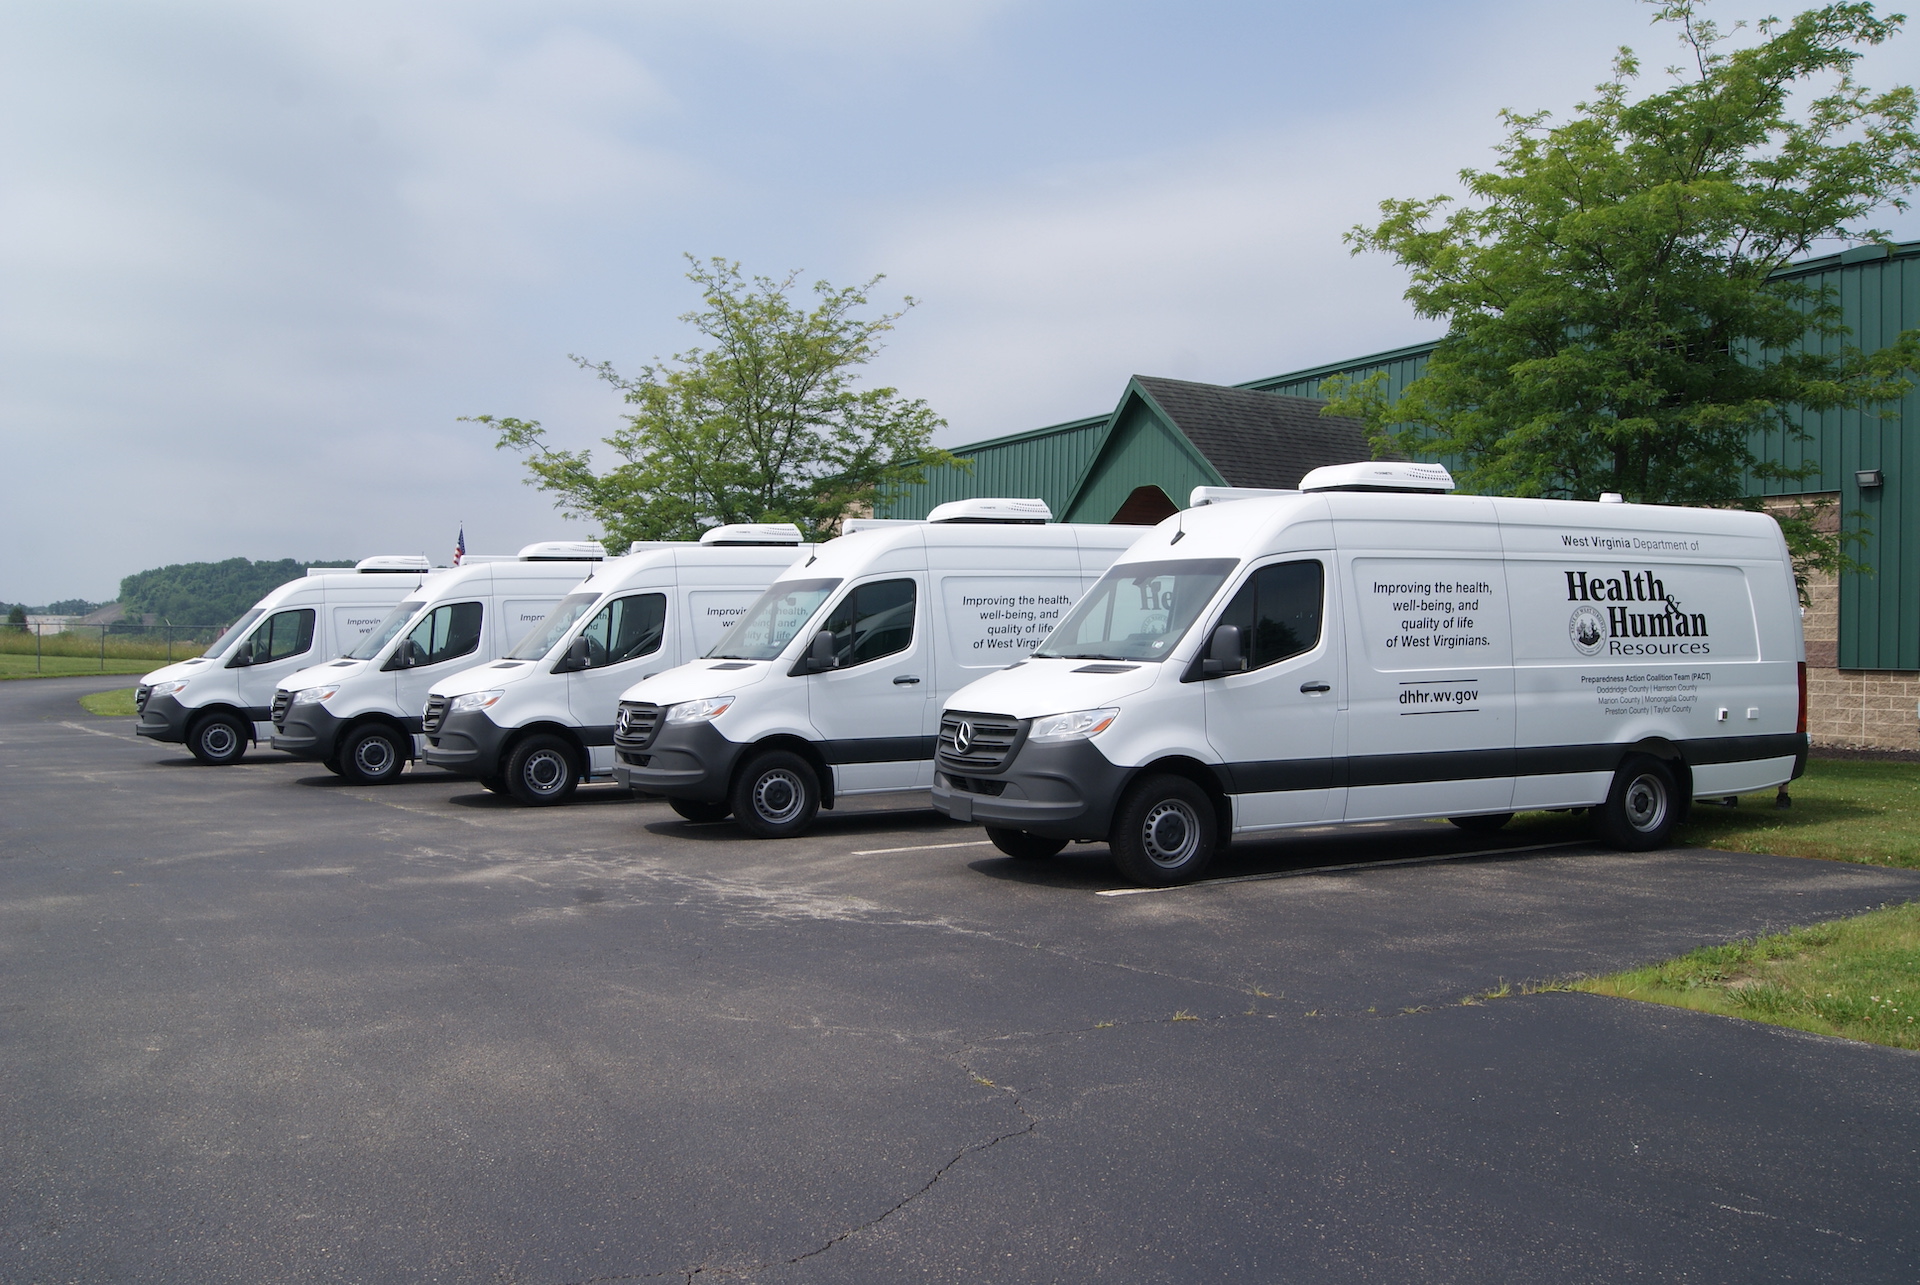 5 of the 19 immunization units made for the Health Department in Huntingdon, WV parked next to one another.